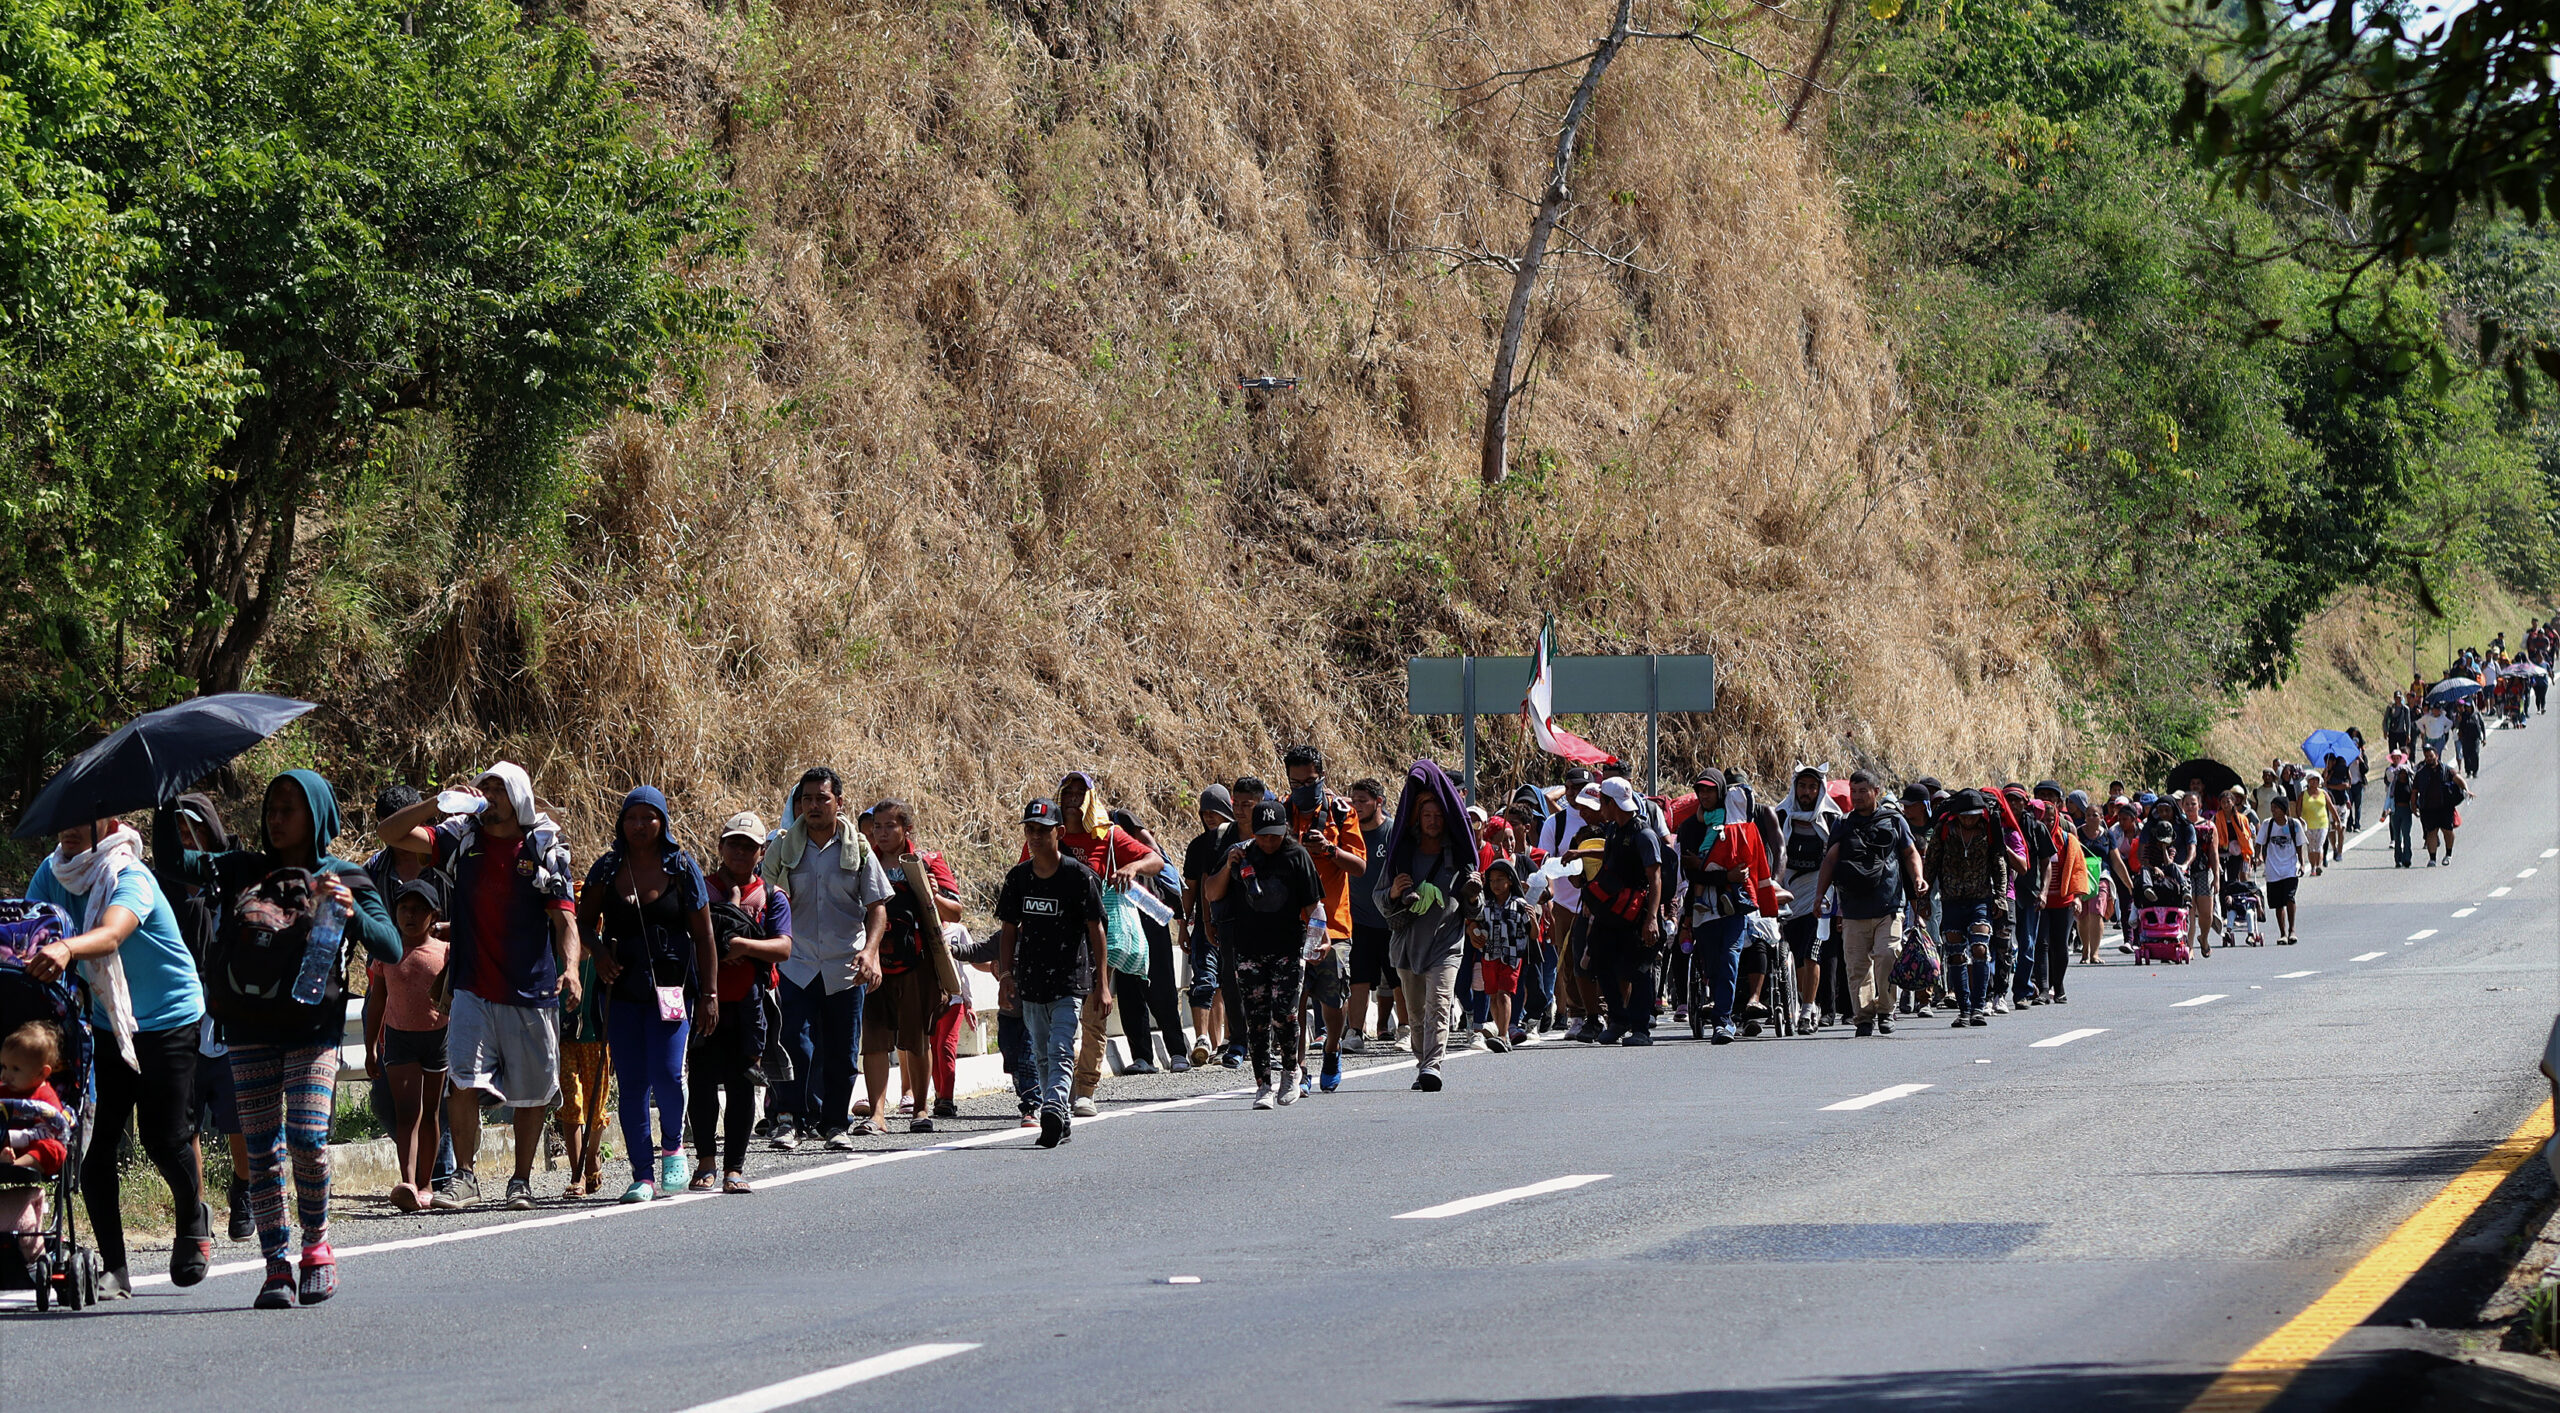 president-of-mexico-blames-human-traffickers-for-organizing-migrant-caravans